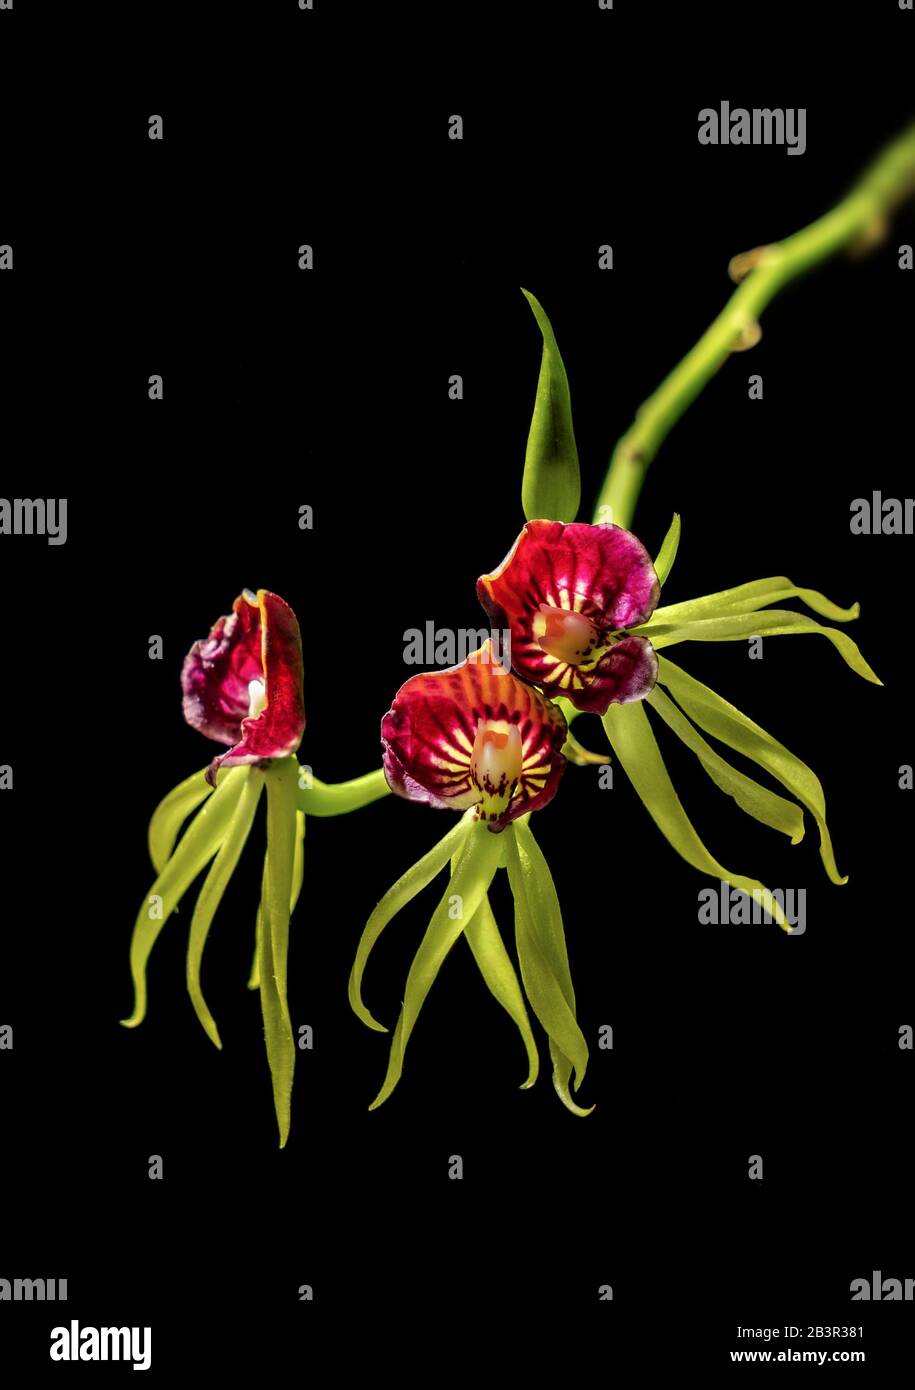 Red and yellow orchid flowers on black background Stock Photo